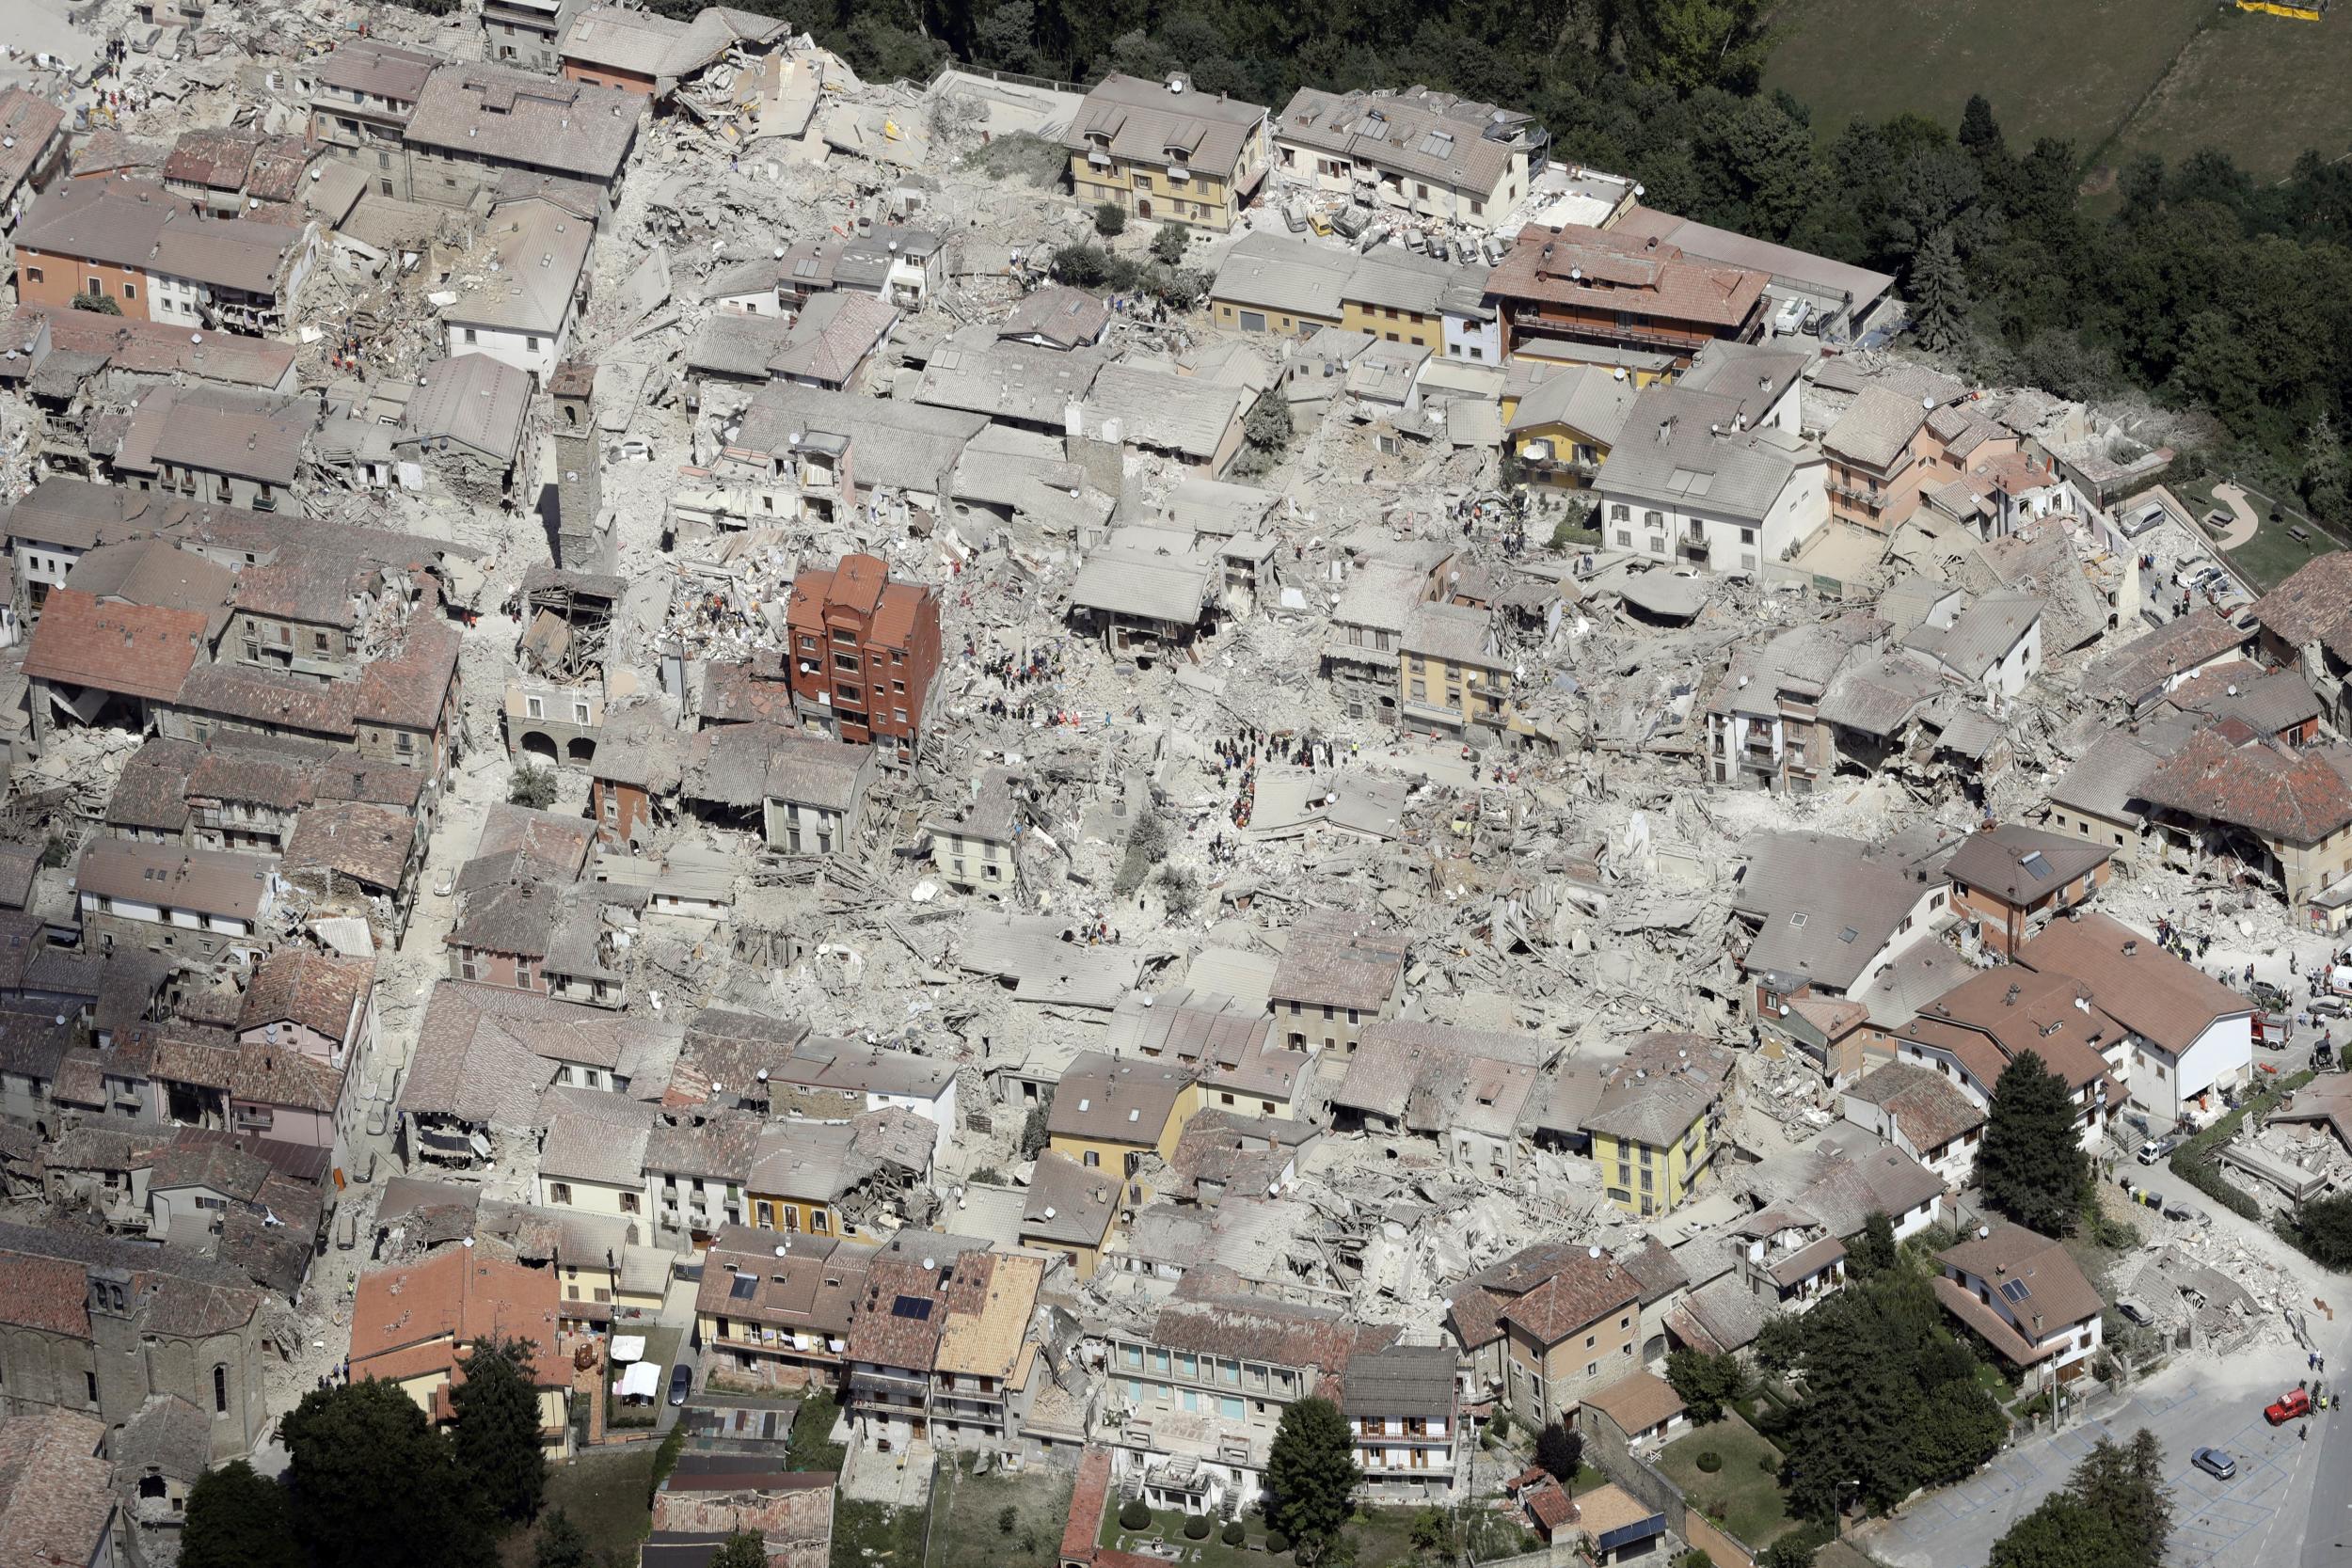 The mayor of Amatrice said: 'The town isn't here anymore'